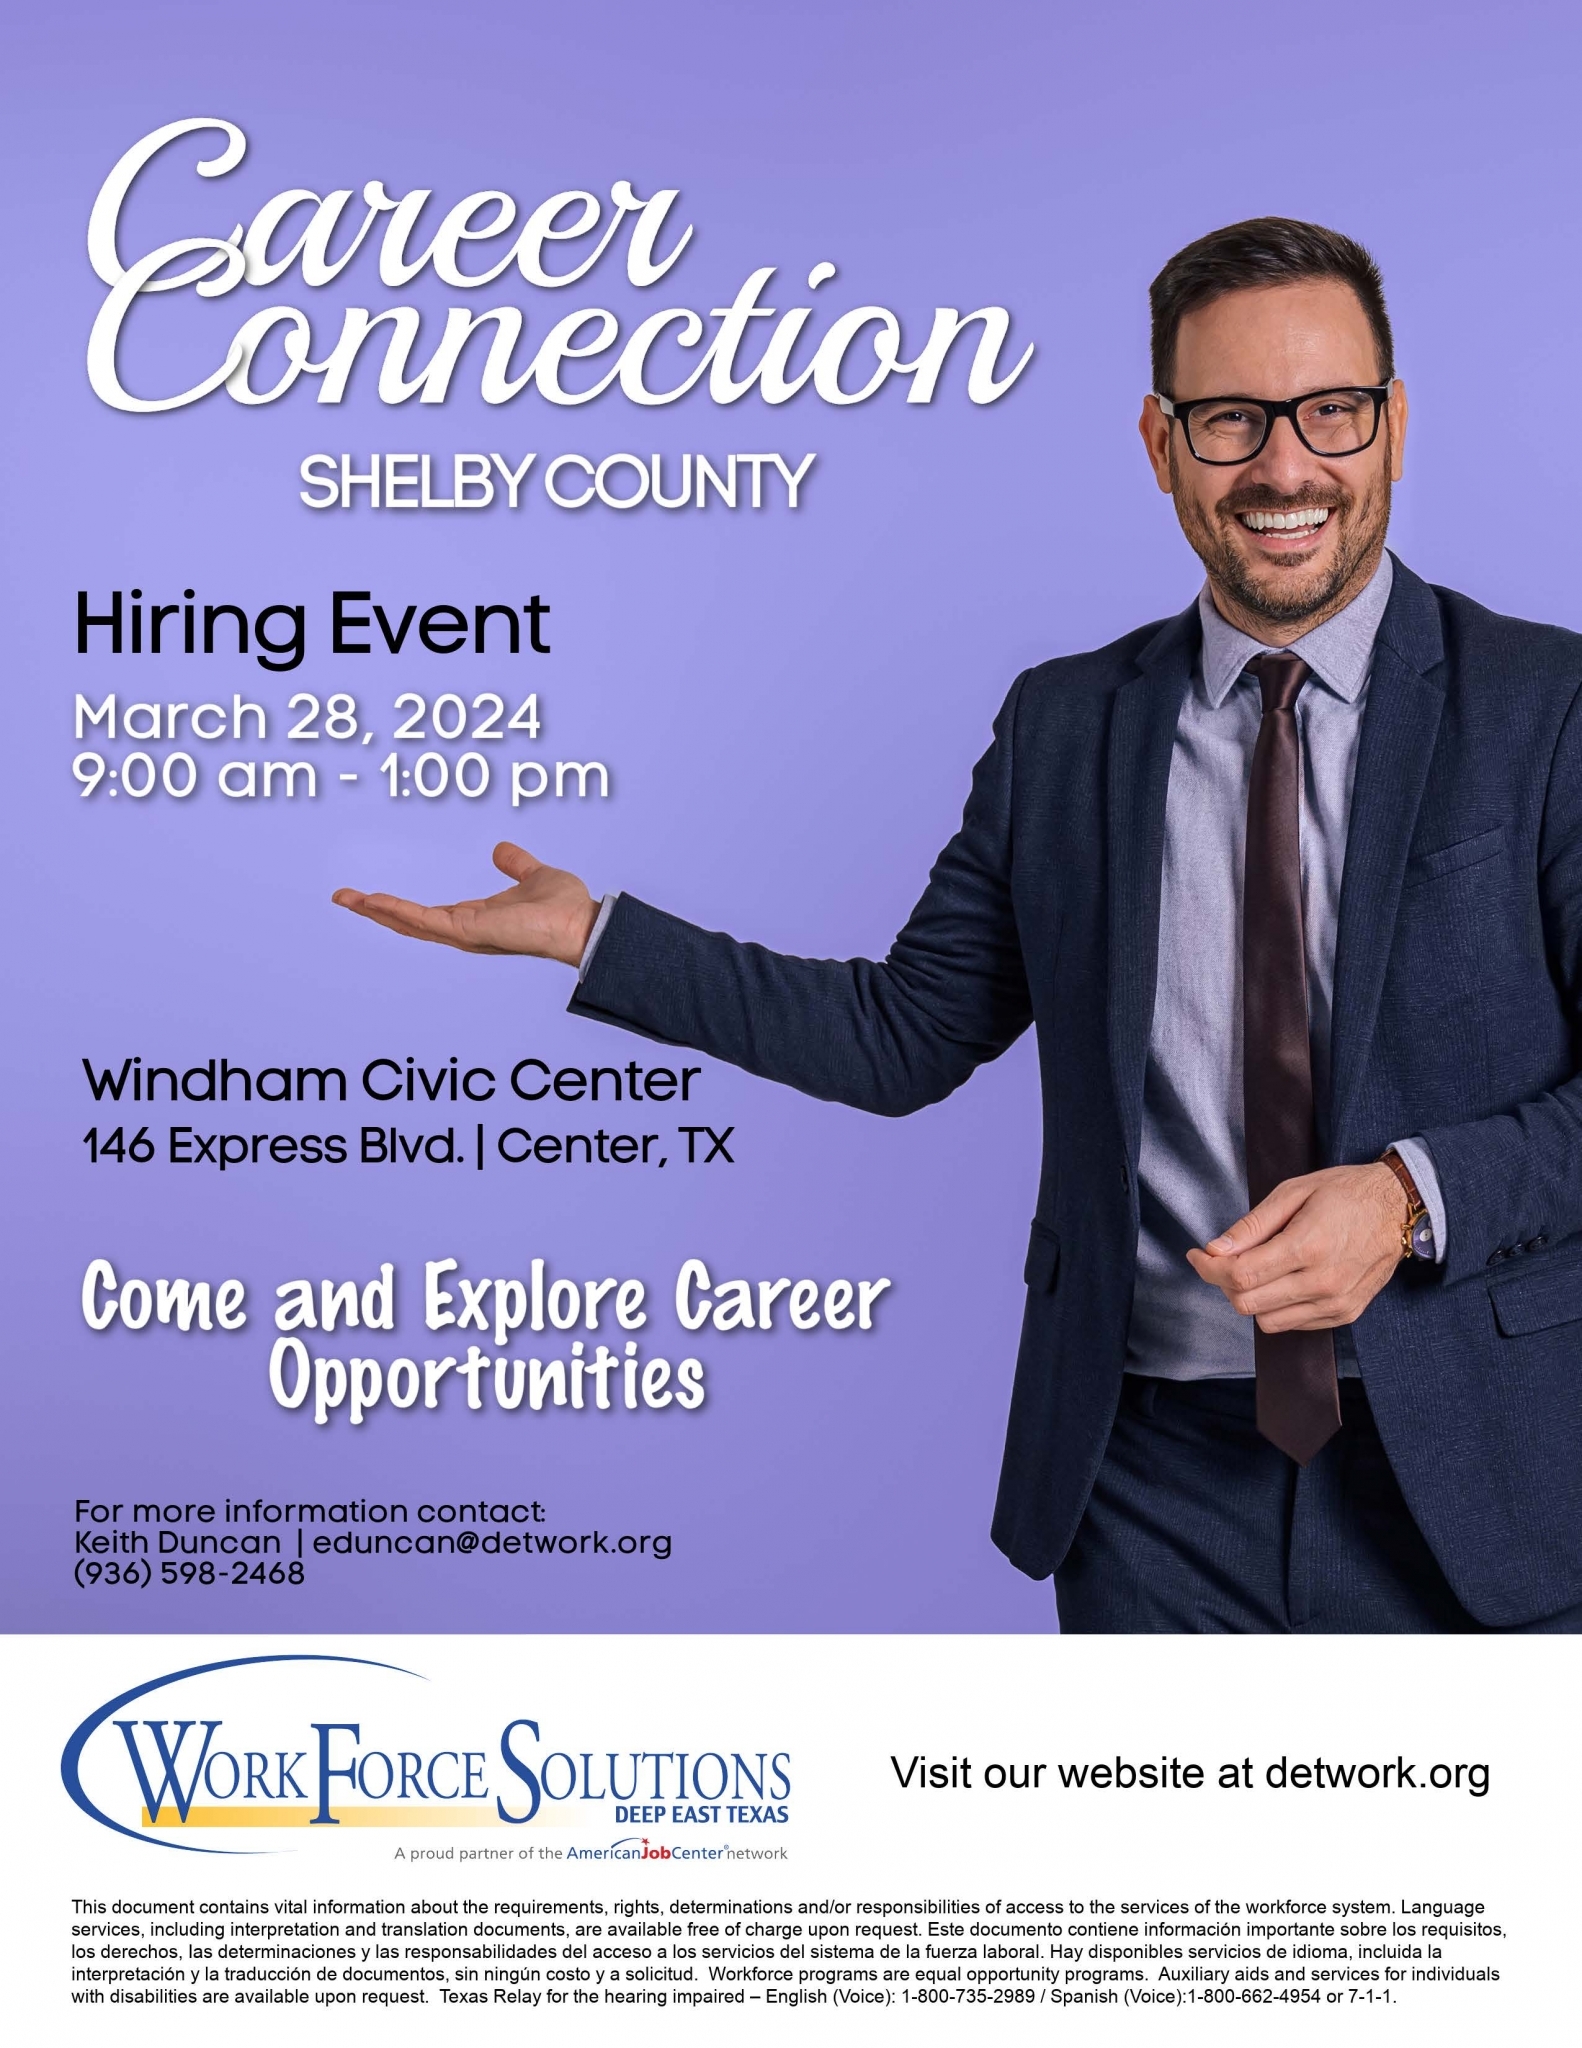 Career Connection in Shelby County March 28, 2024